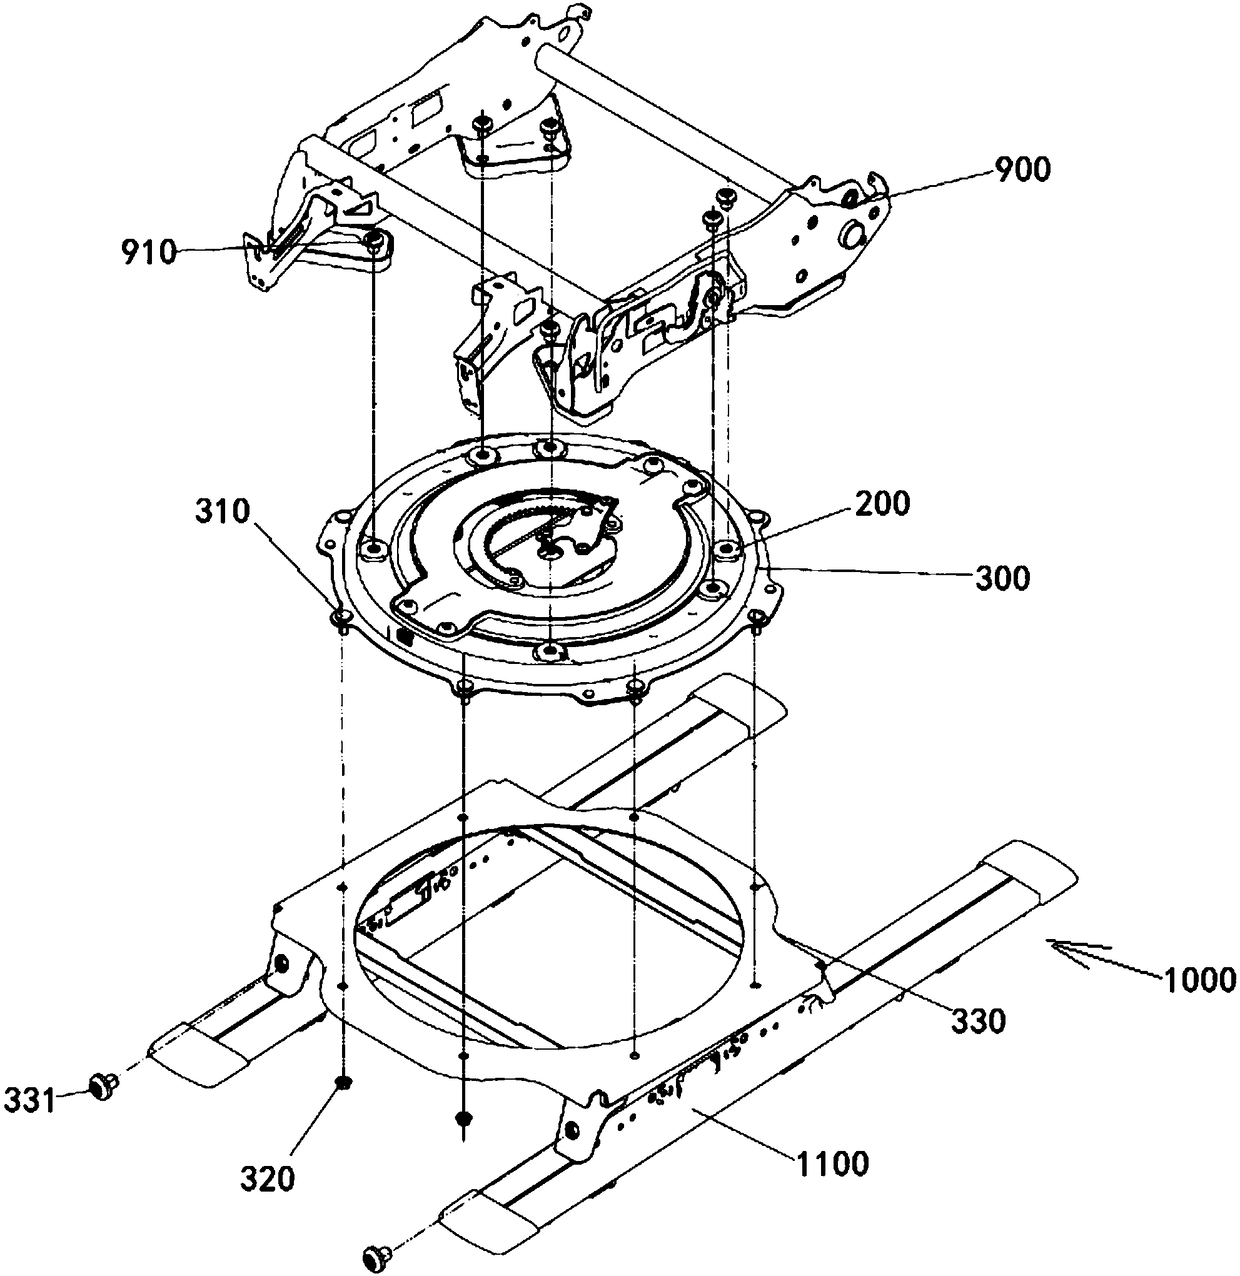 Electric rotation mechanism for seat